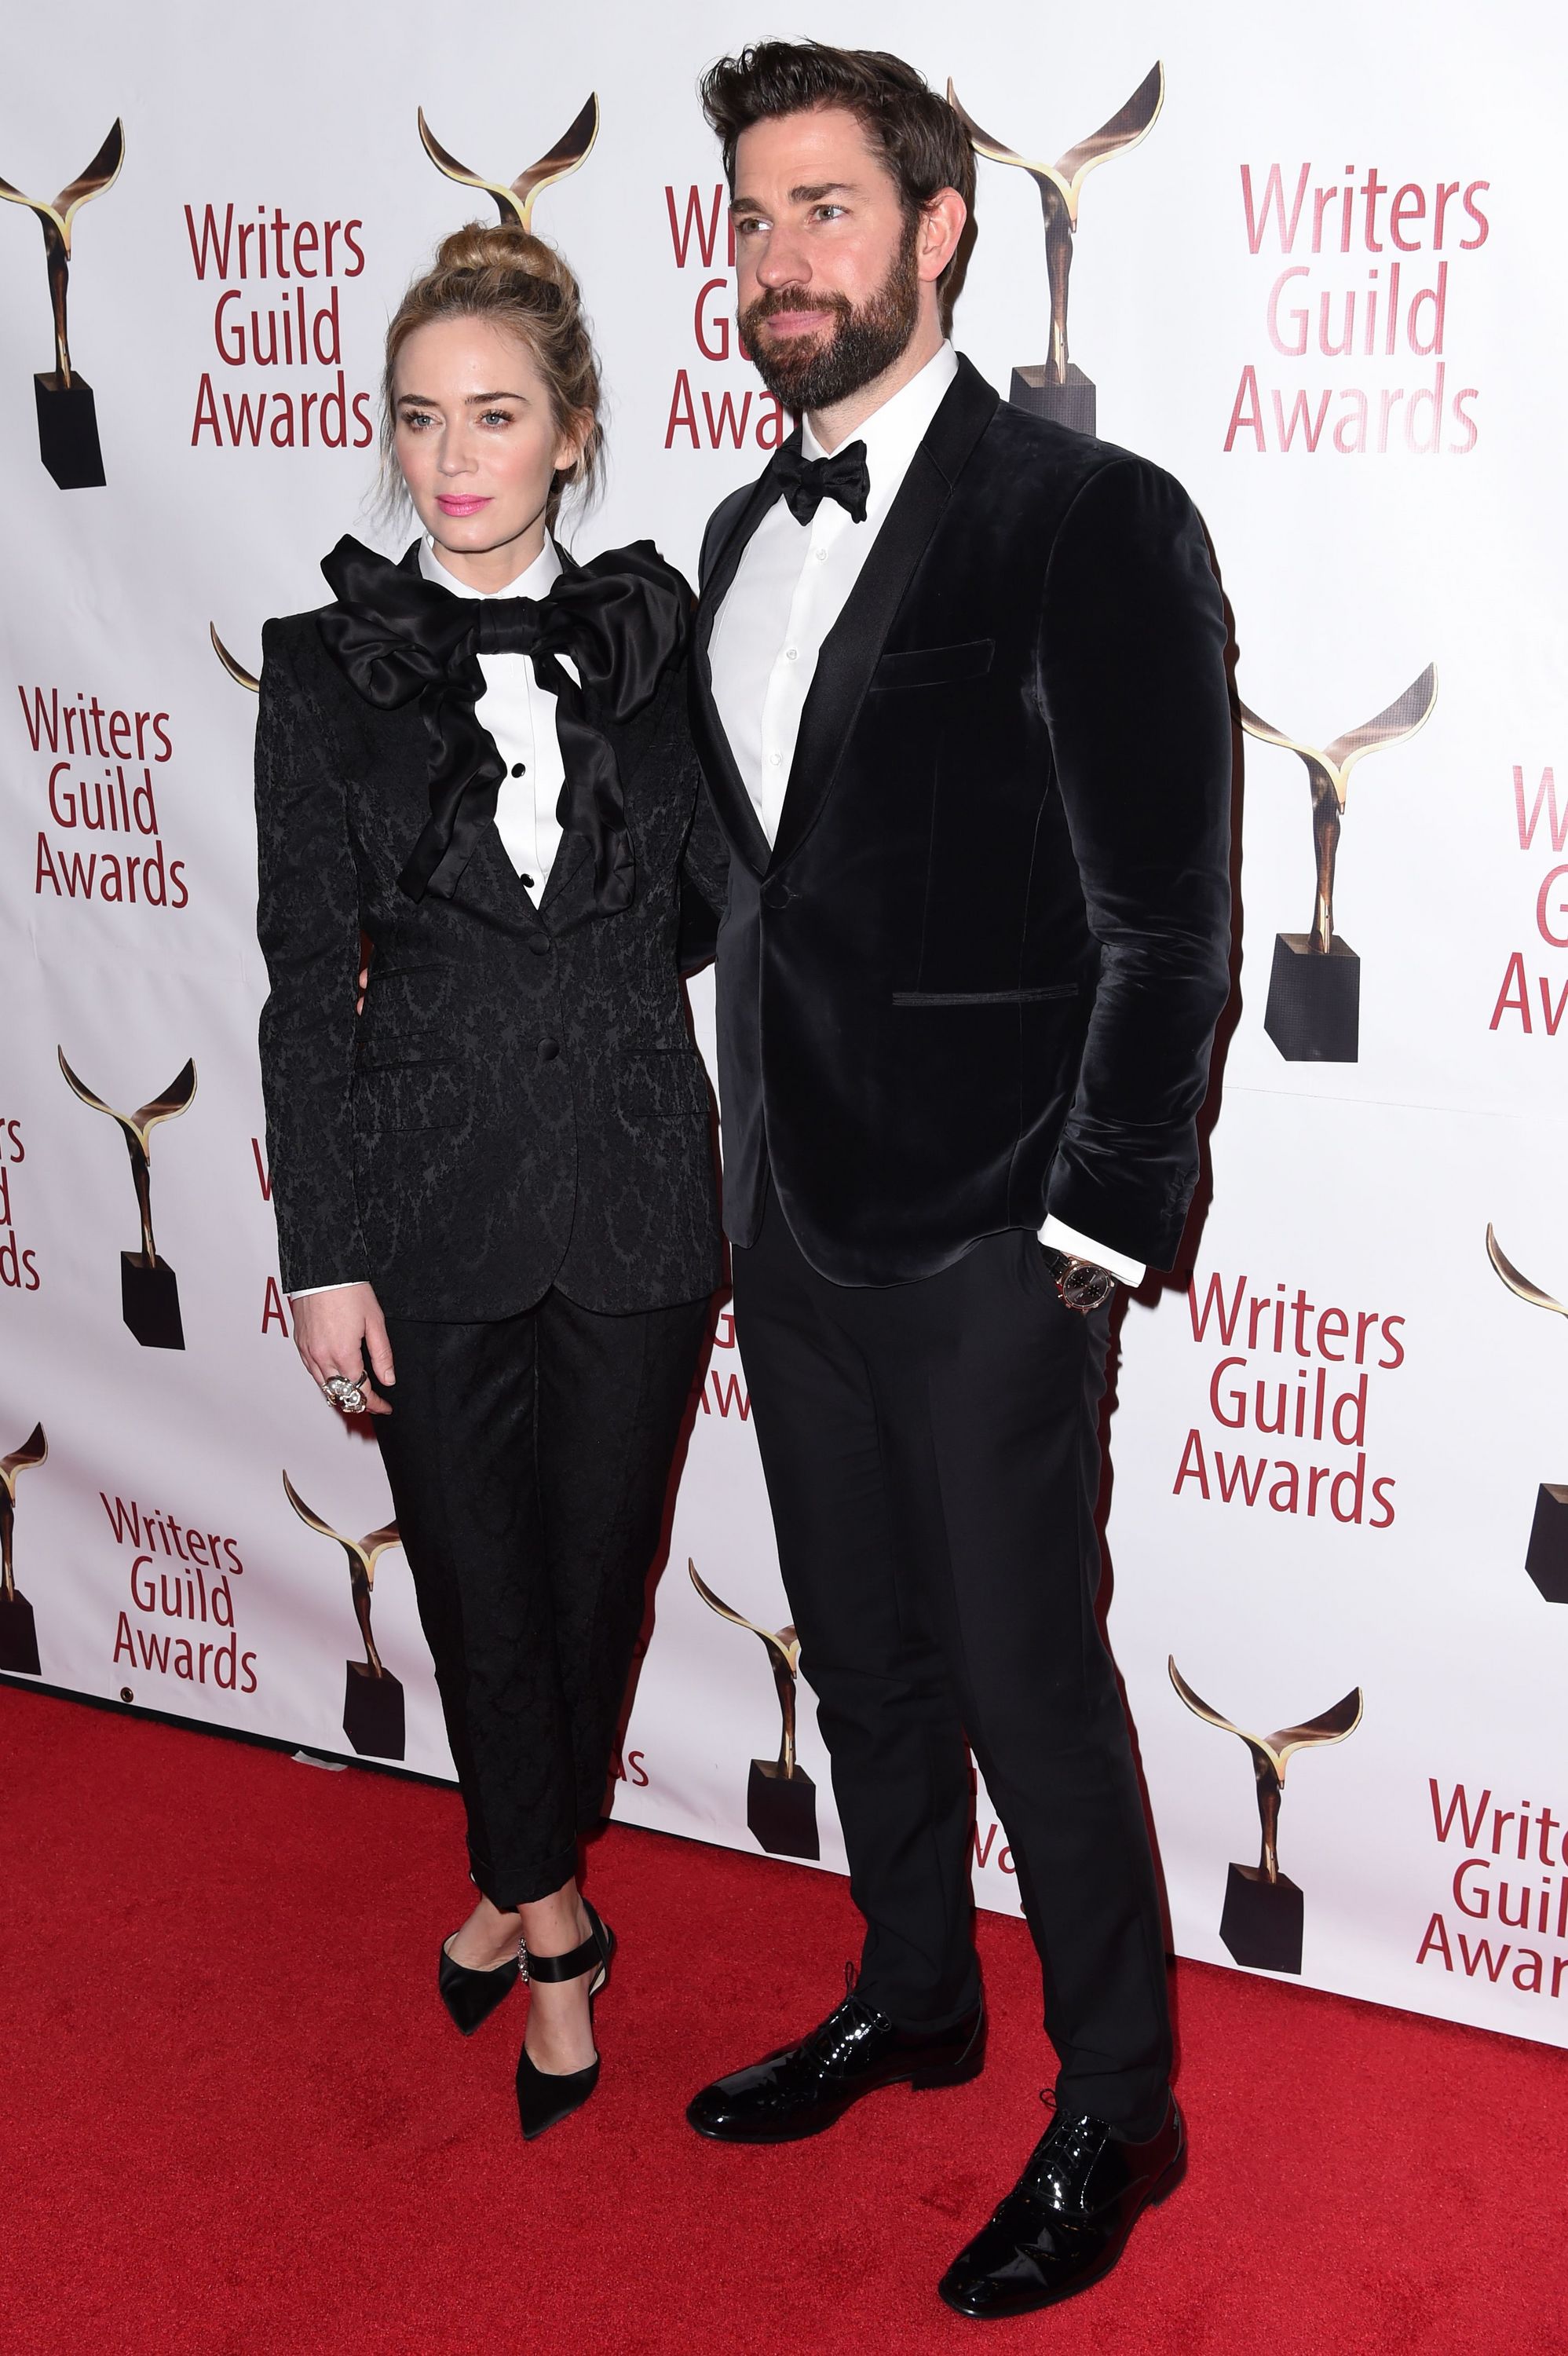 2019-02-17-71st-Annual-Writers-Guild-Awards-093.jpg